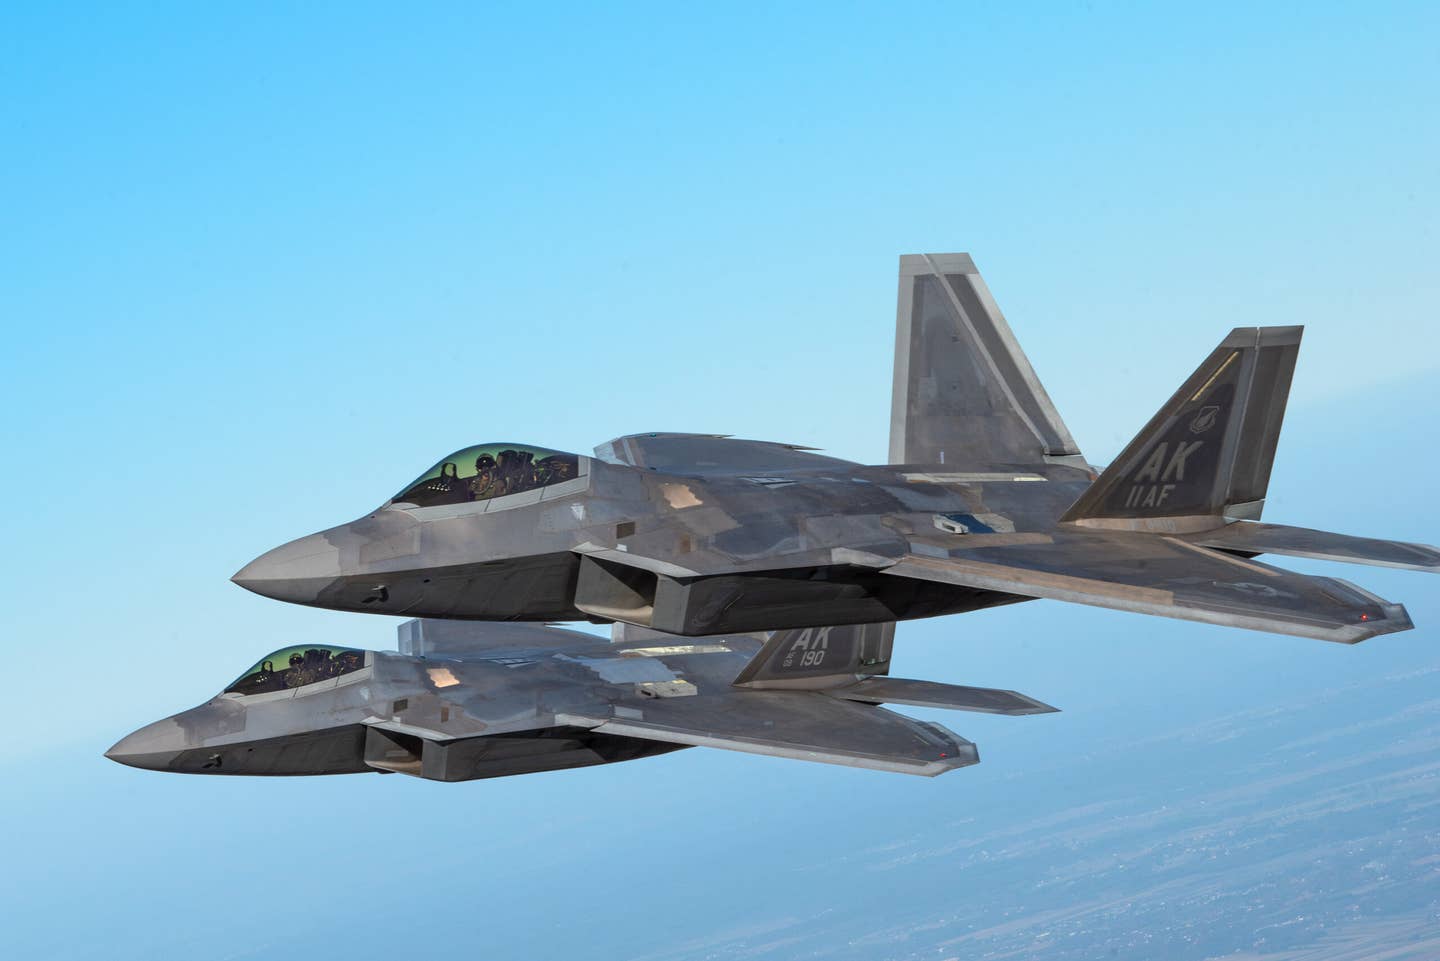 A pair of F-22 Raptors from the 90th Fighter Squadron flying out of&nbsp;Łask Air Base in Poland on Oct. 12, 2022. <em>USAF</em>